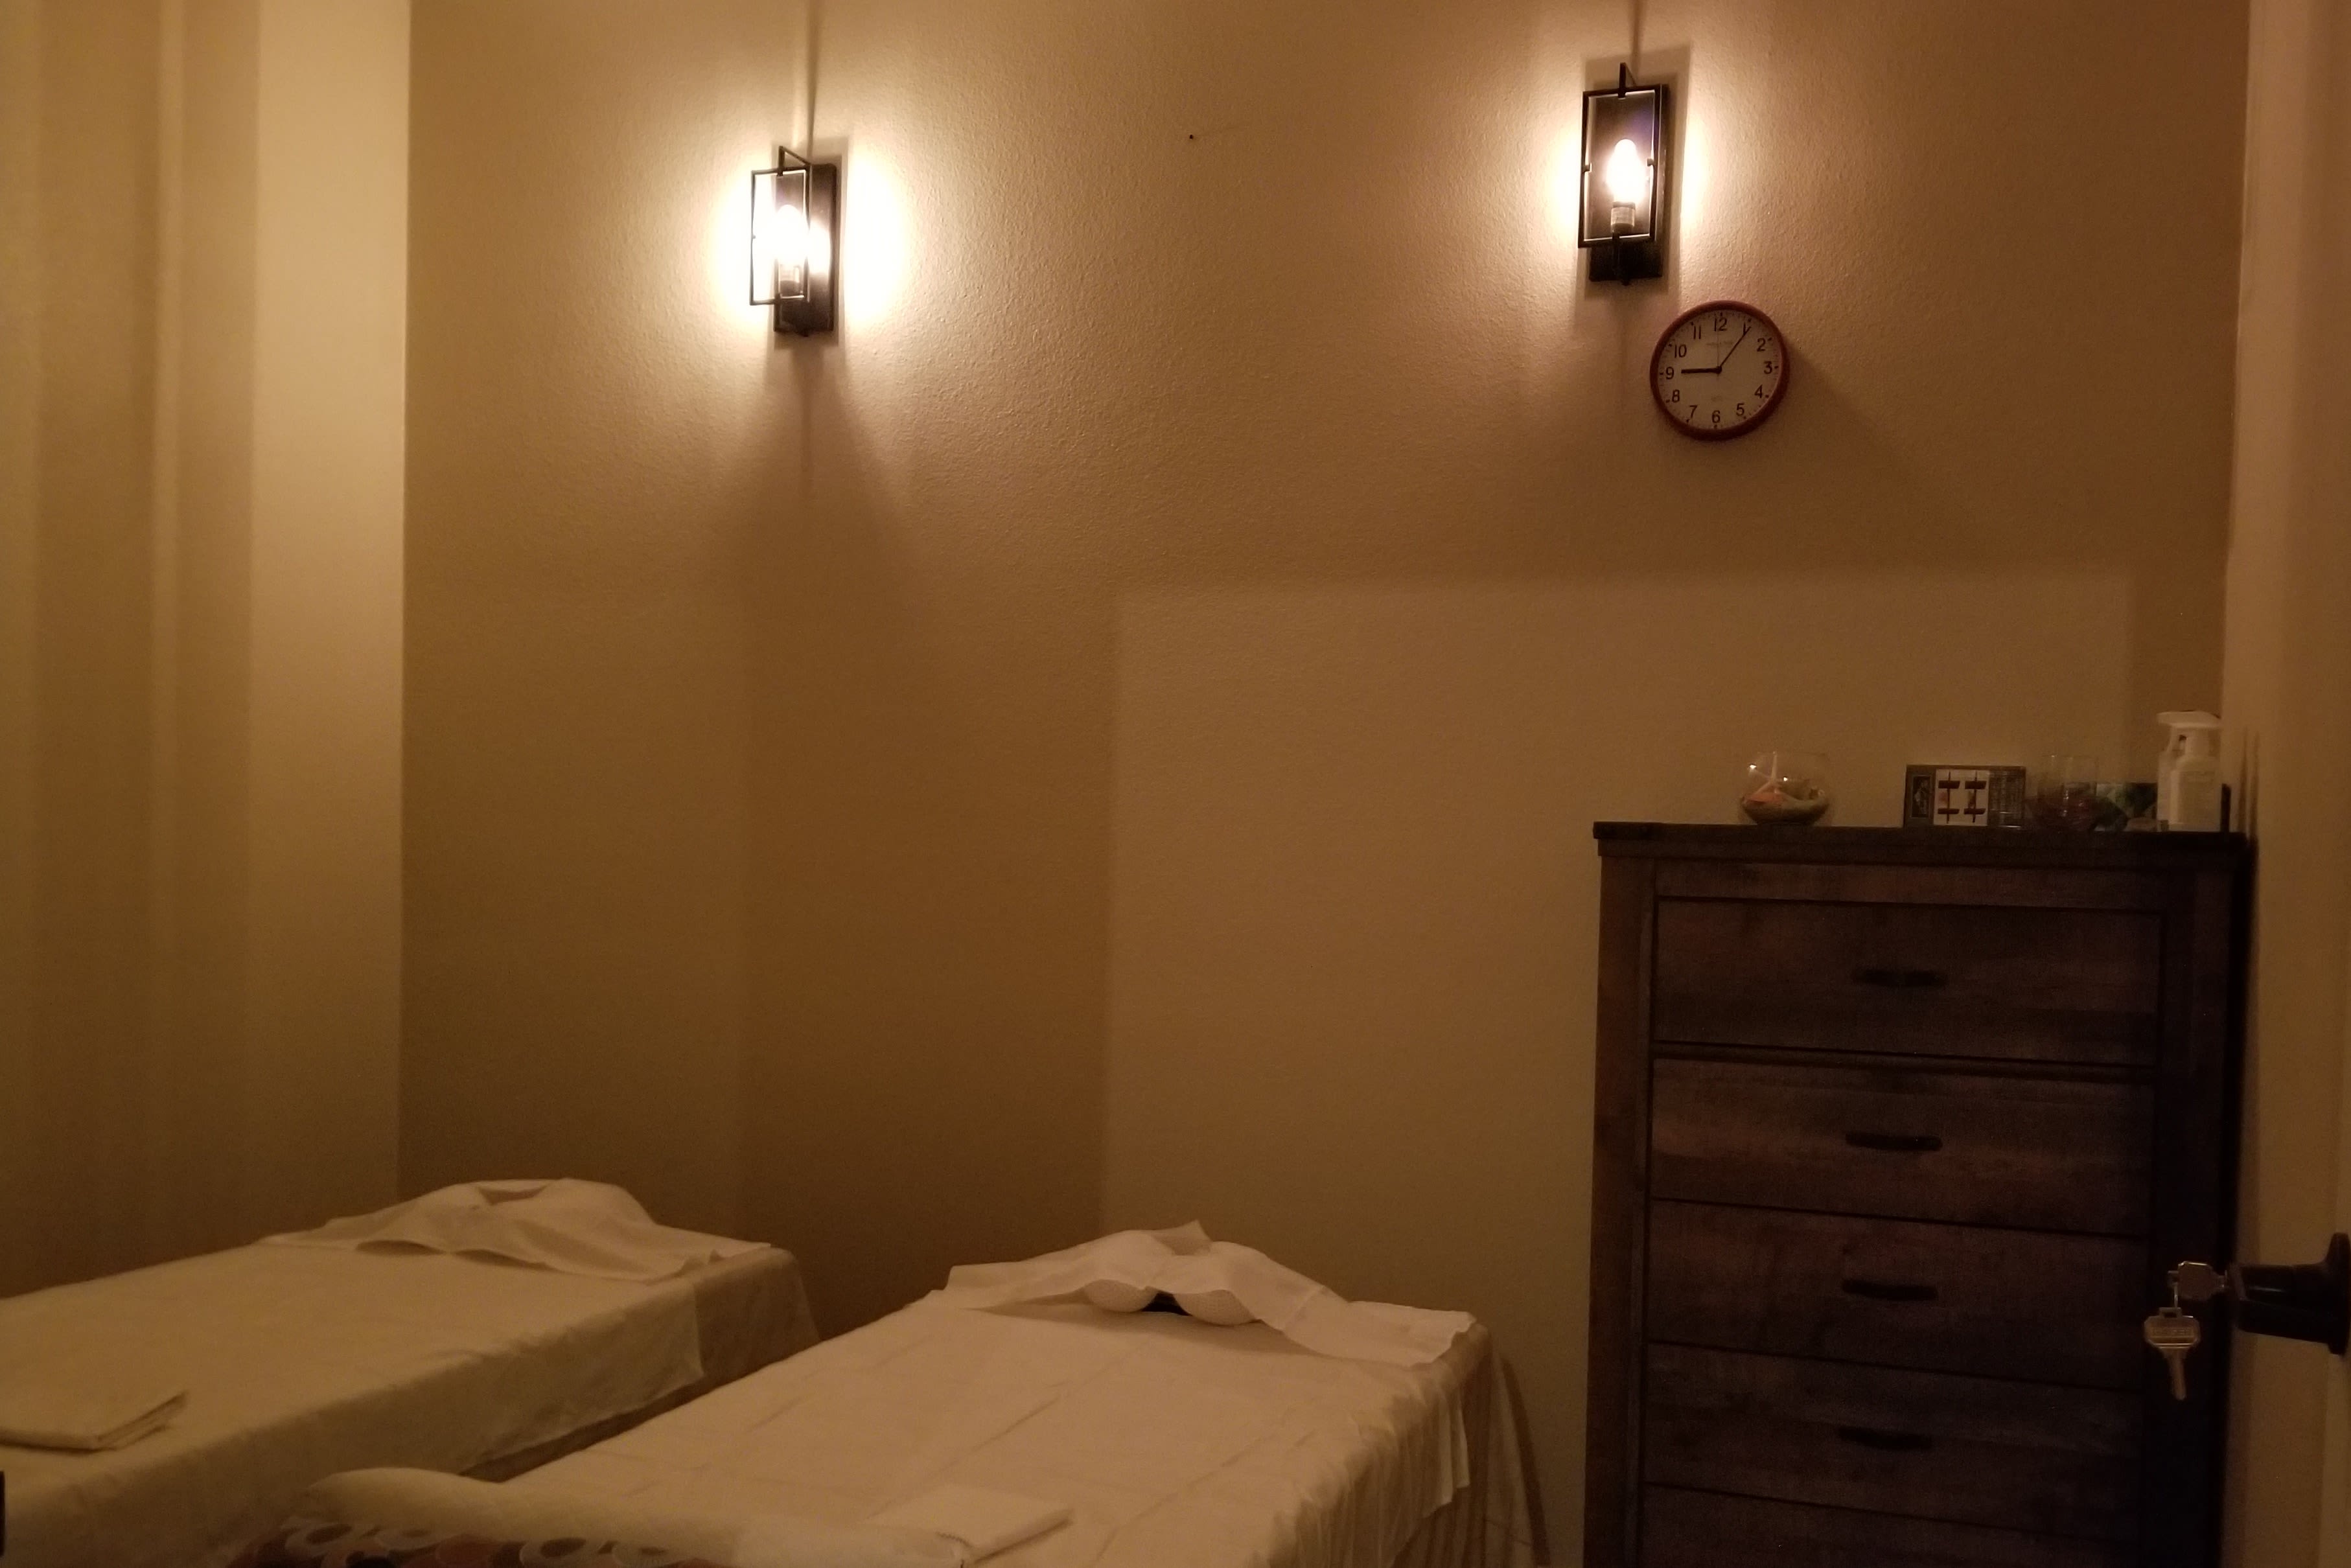 tyran med sig At bidrage FB Massage Spa: Read Reviews and Book Classes on ClassPass